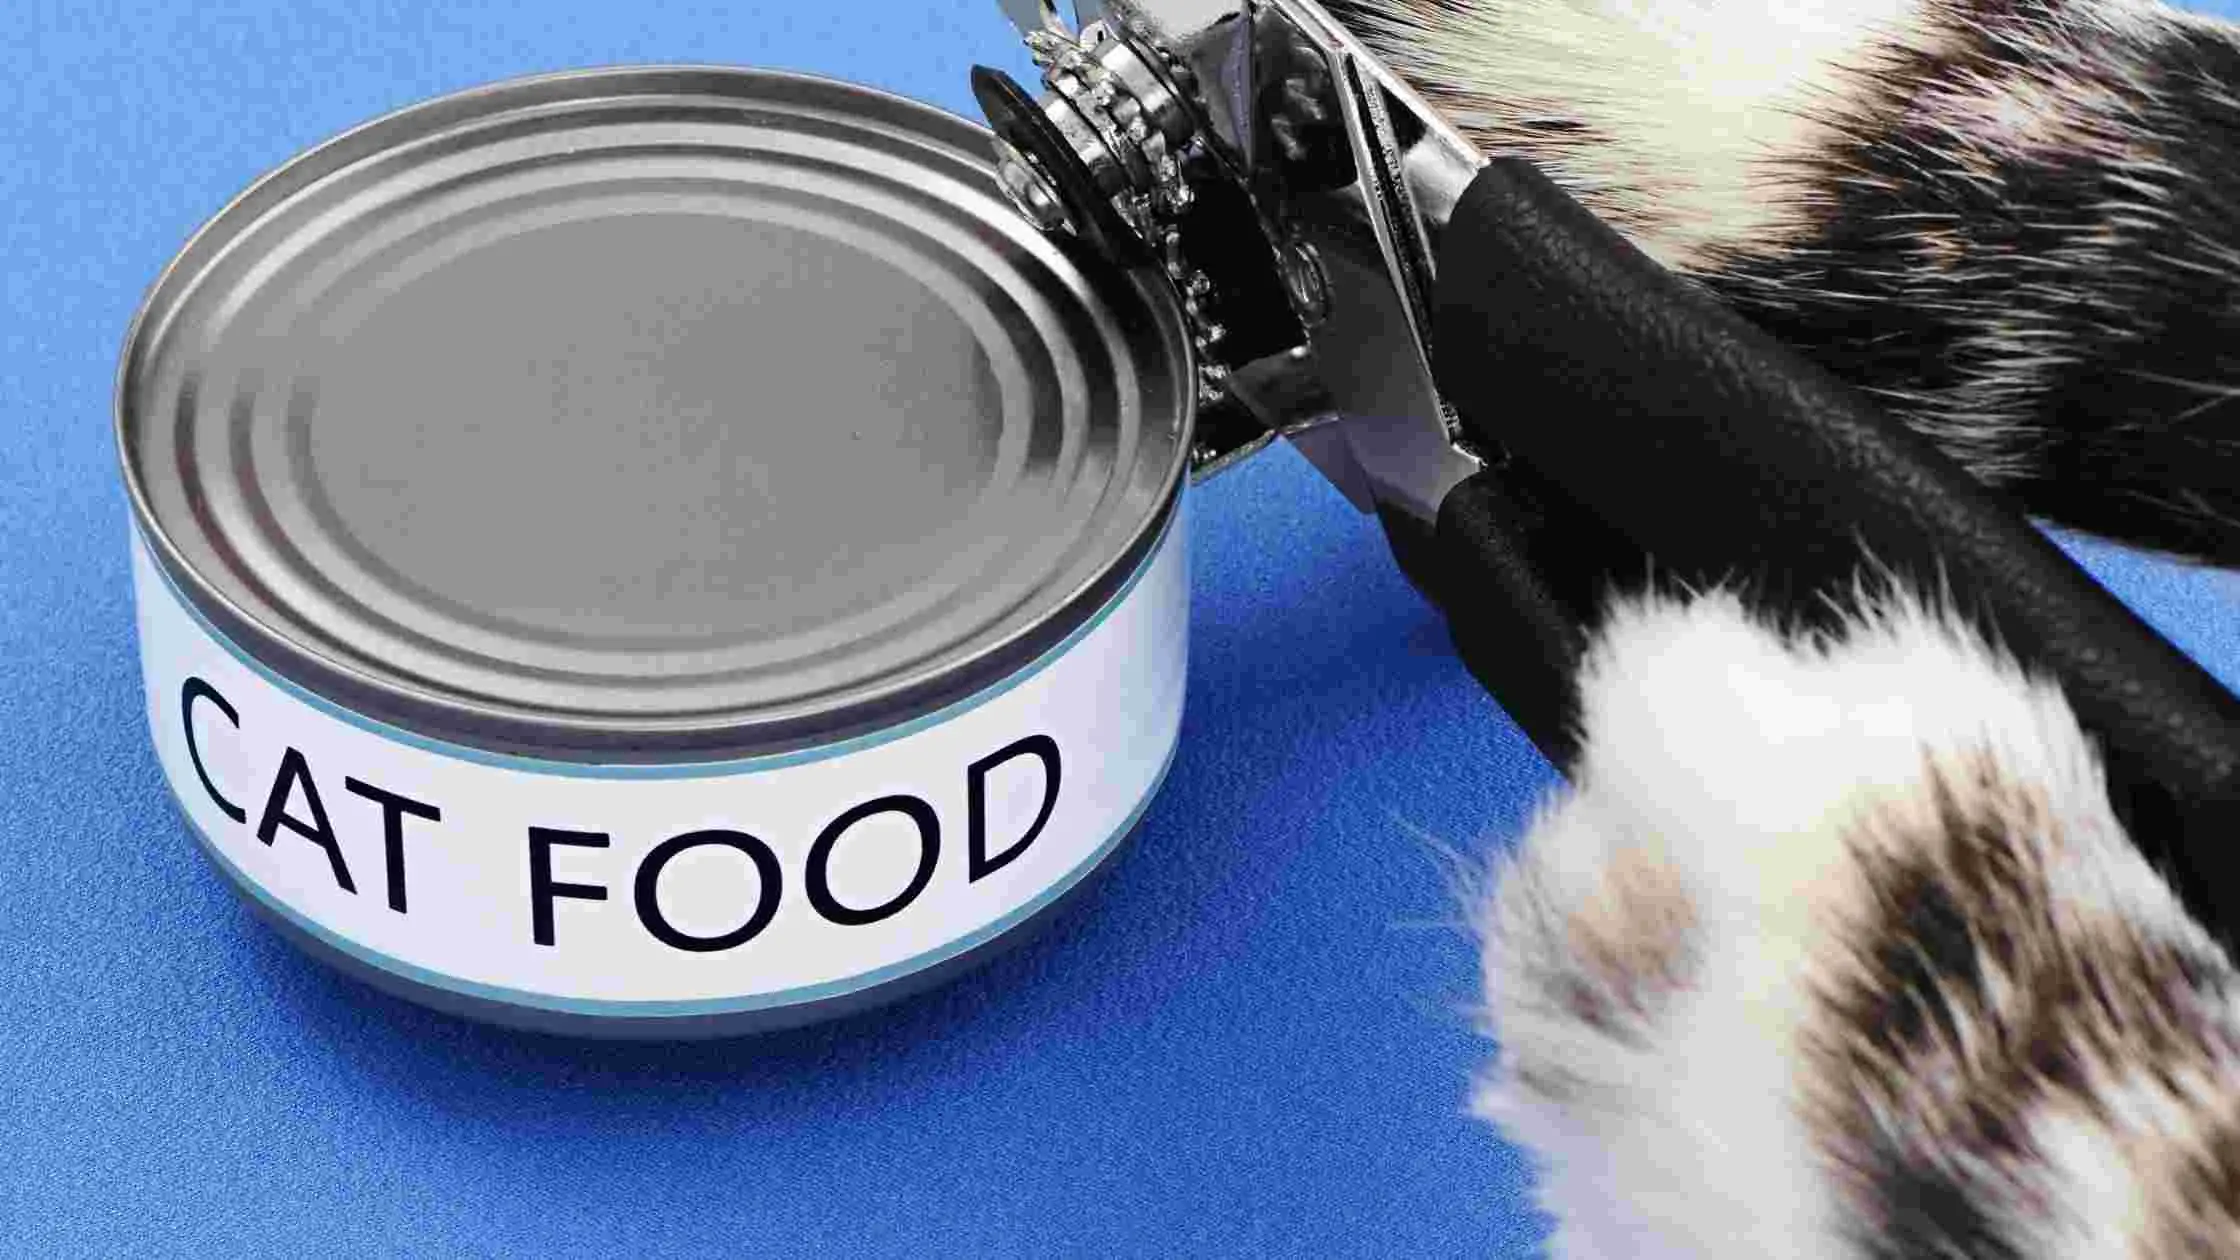 Are Cat Food Cans Recyclable